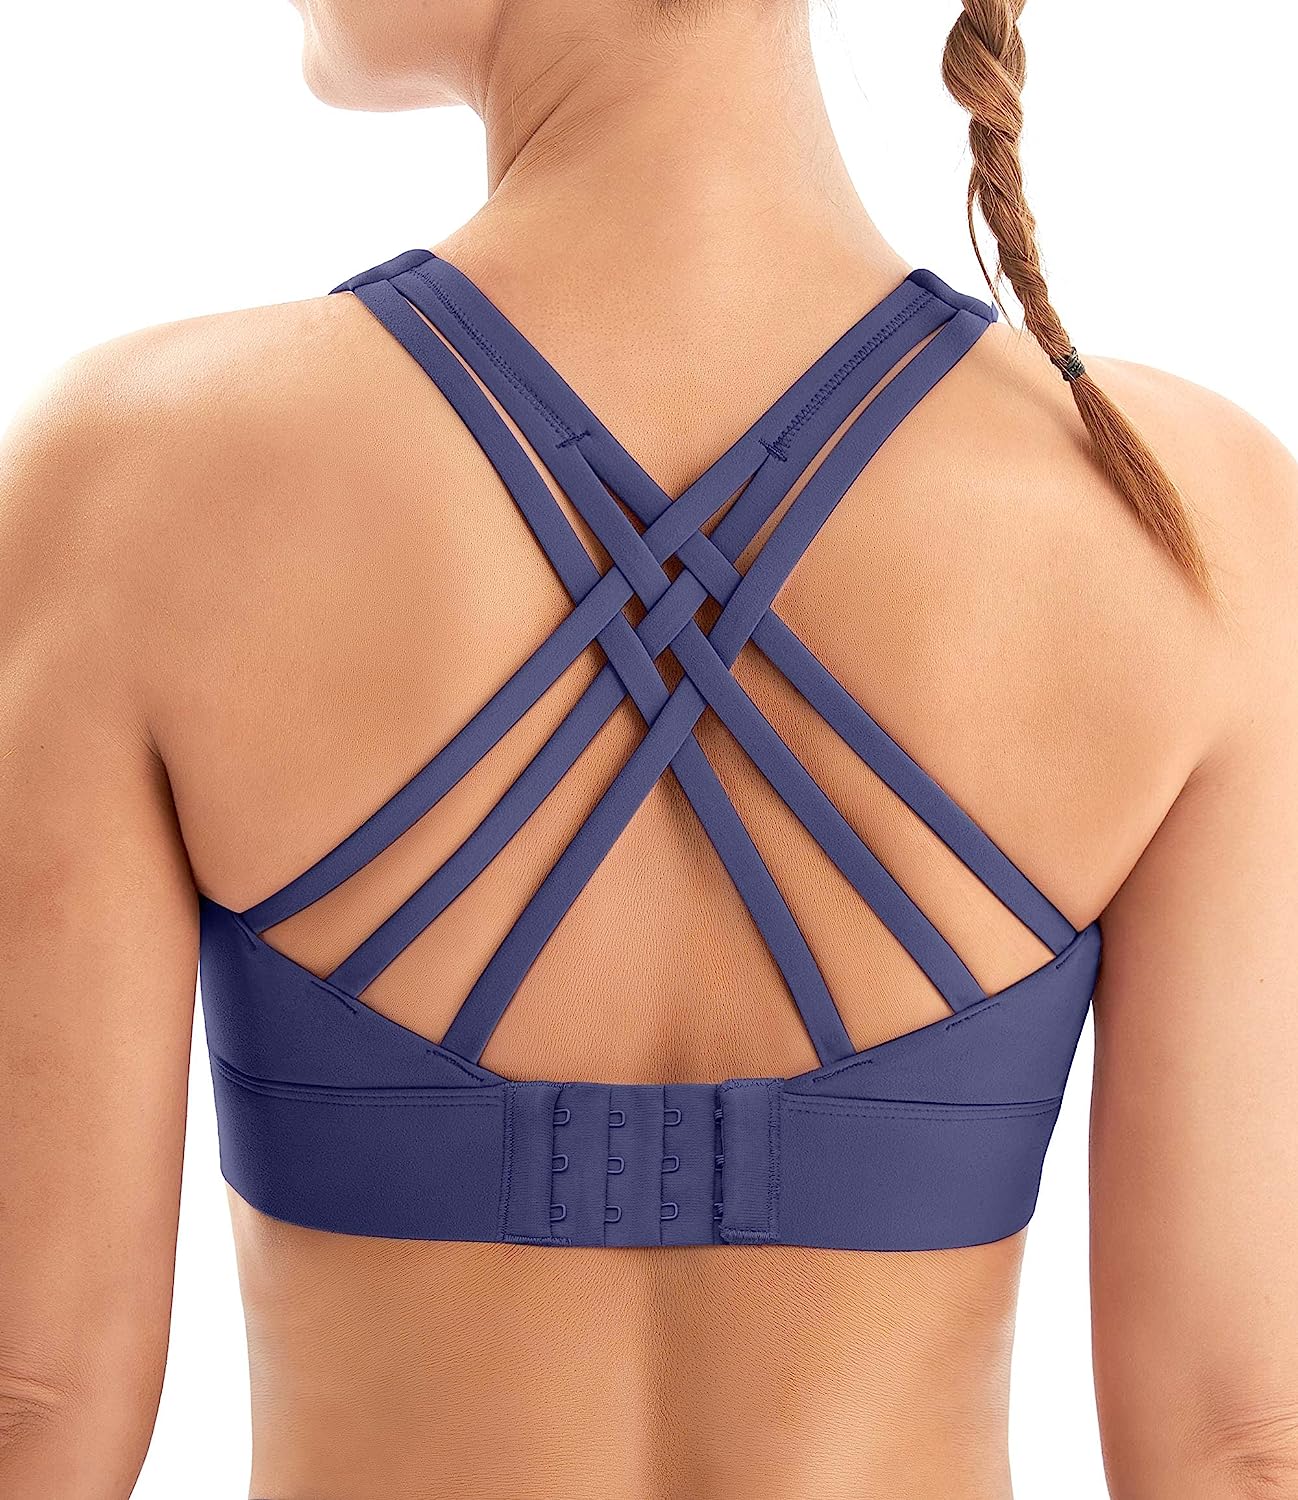  High Impact Sports Bras For Women High Support